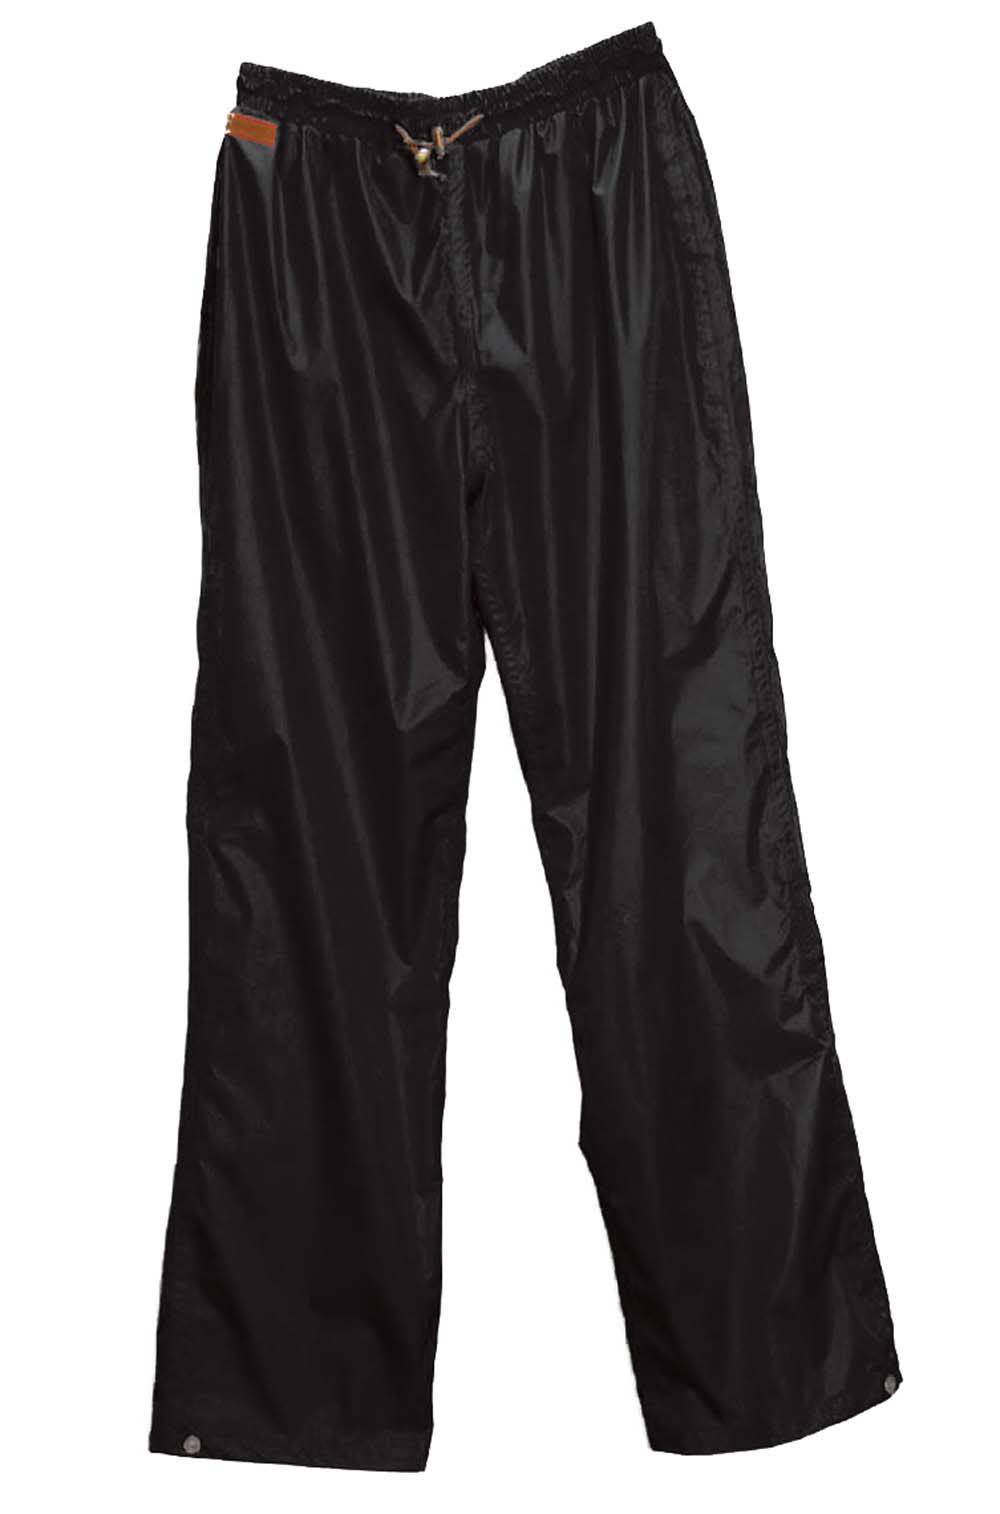 Outback Trading Packable Pack-A-Roo Overpant- Unisex